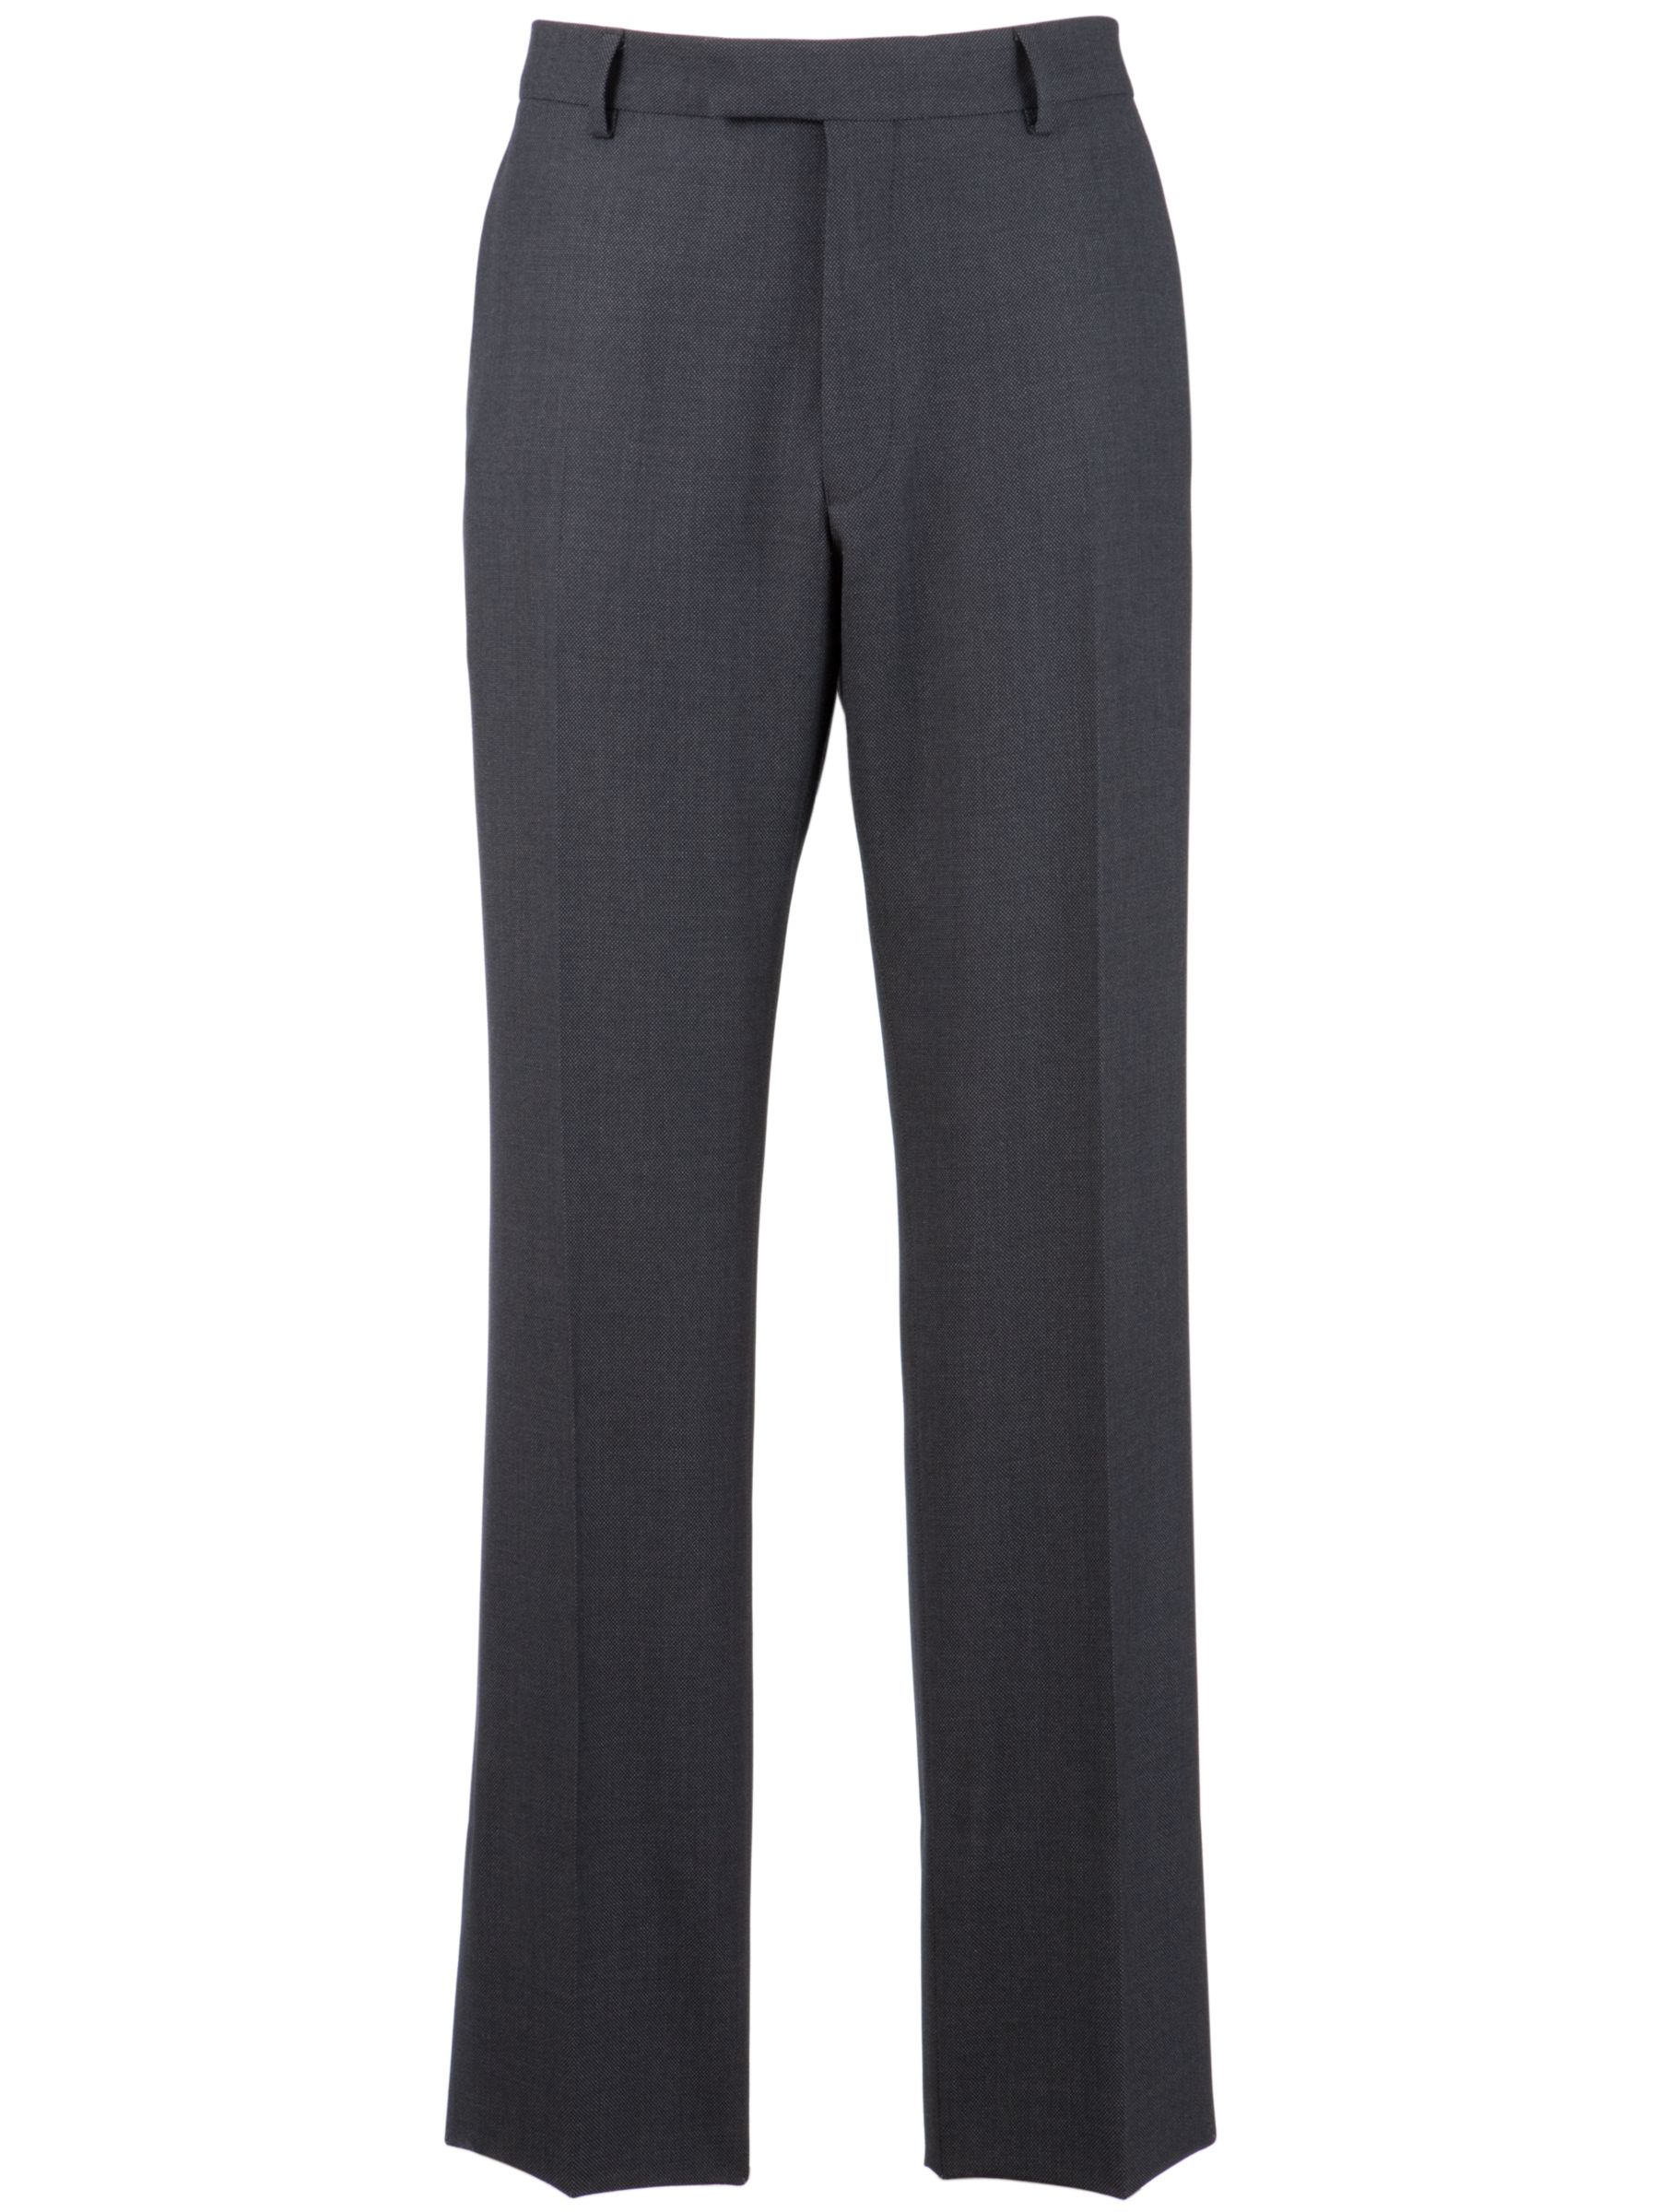 Mayfair Richard James Birdseye Flat Fronted Suit Trousers, Charcoal at John Lewis